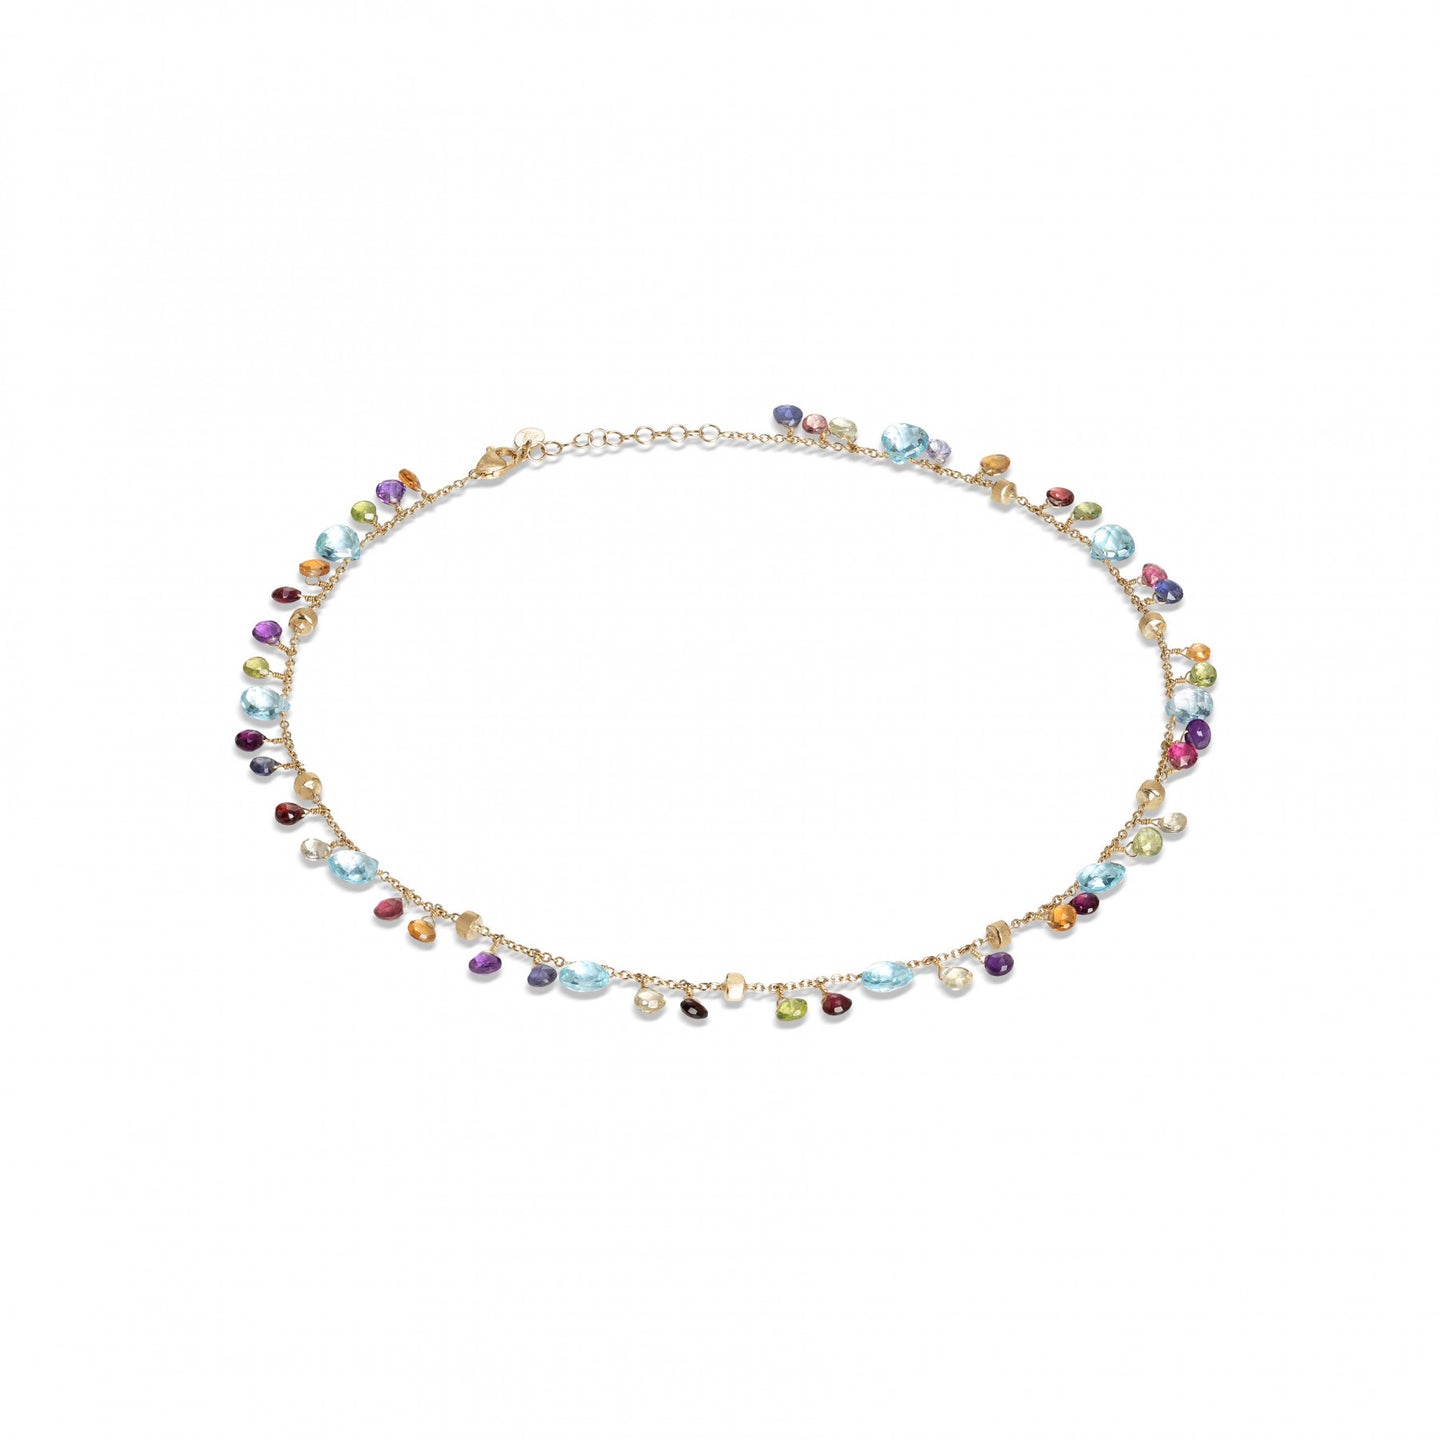 Marco Bicego Paradise 18K Yellow Gold Topaz and Mixed Gemstone Necklace